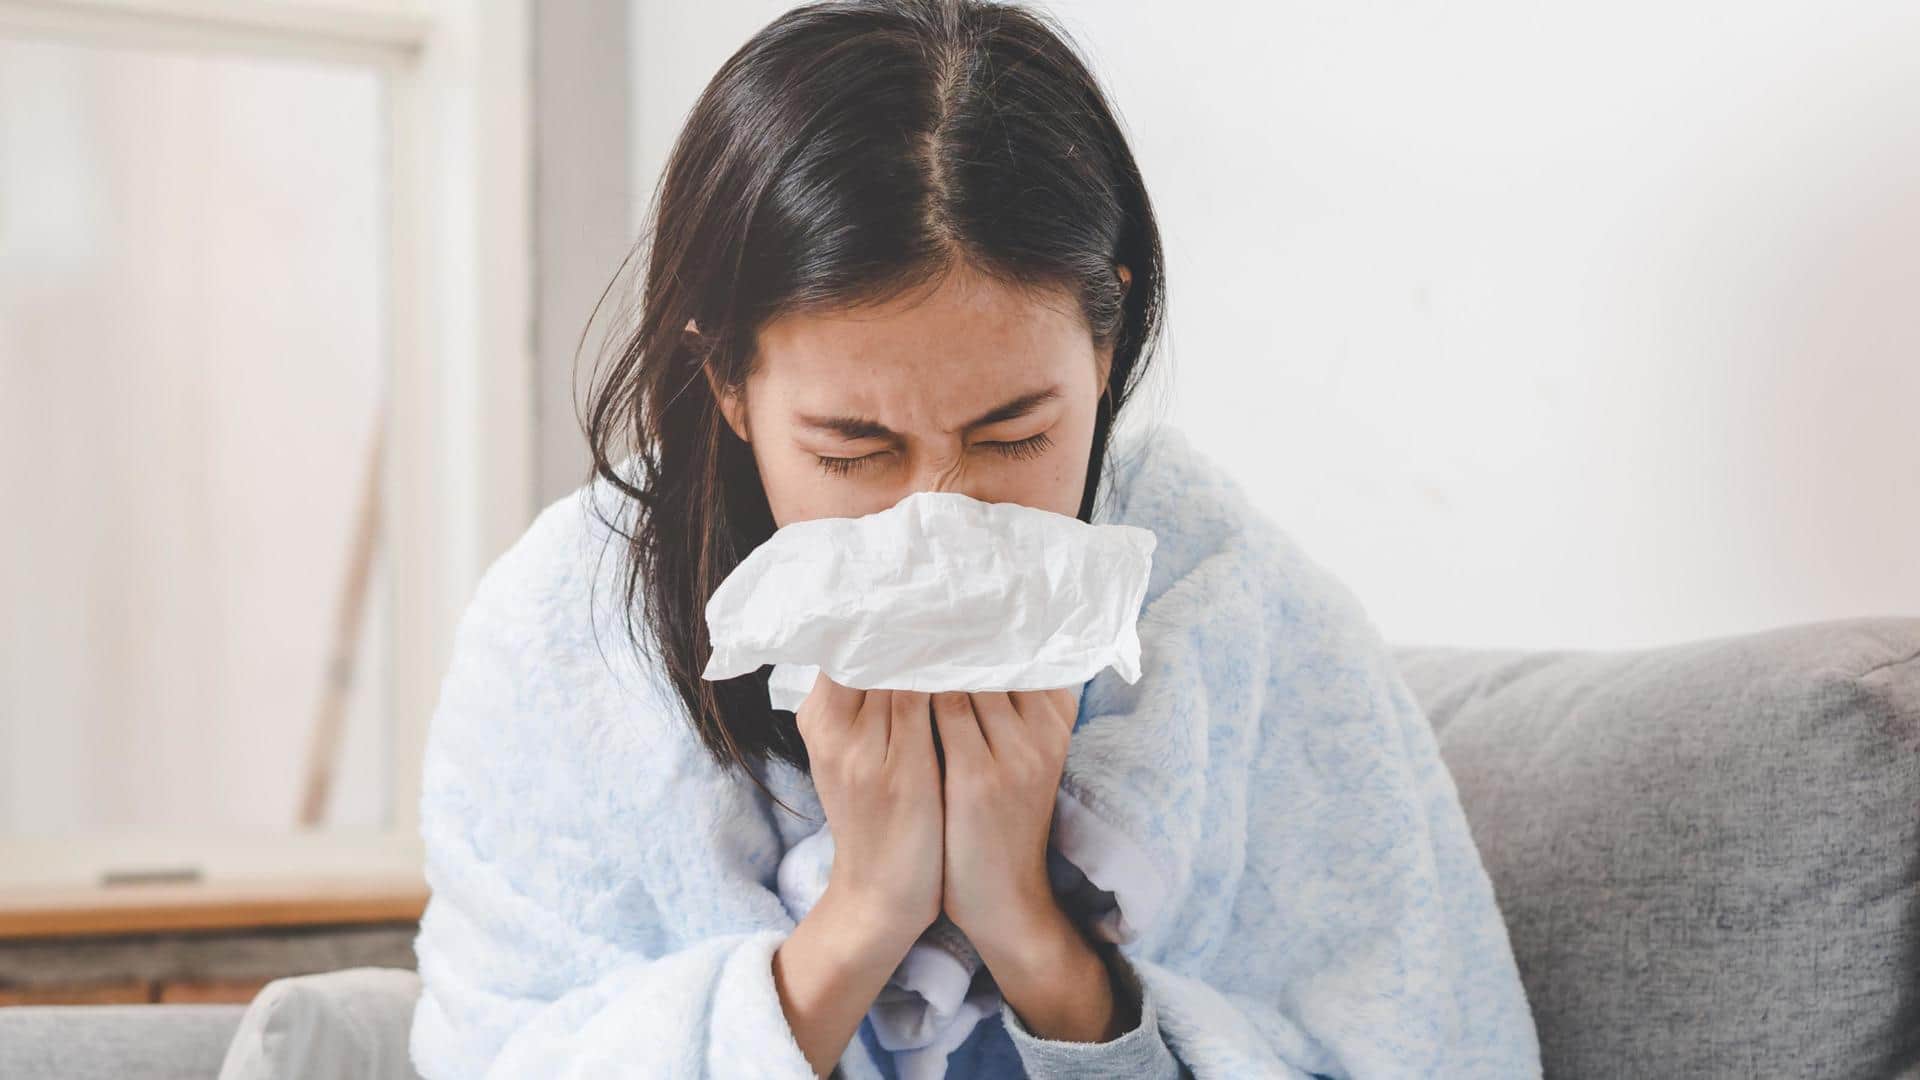 Here's why almost everyone around you is falling sick